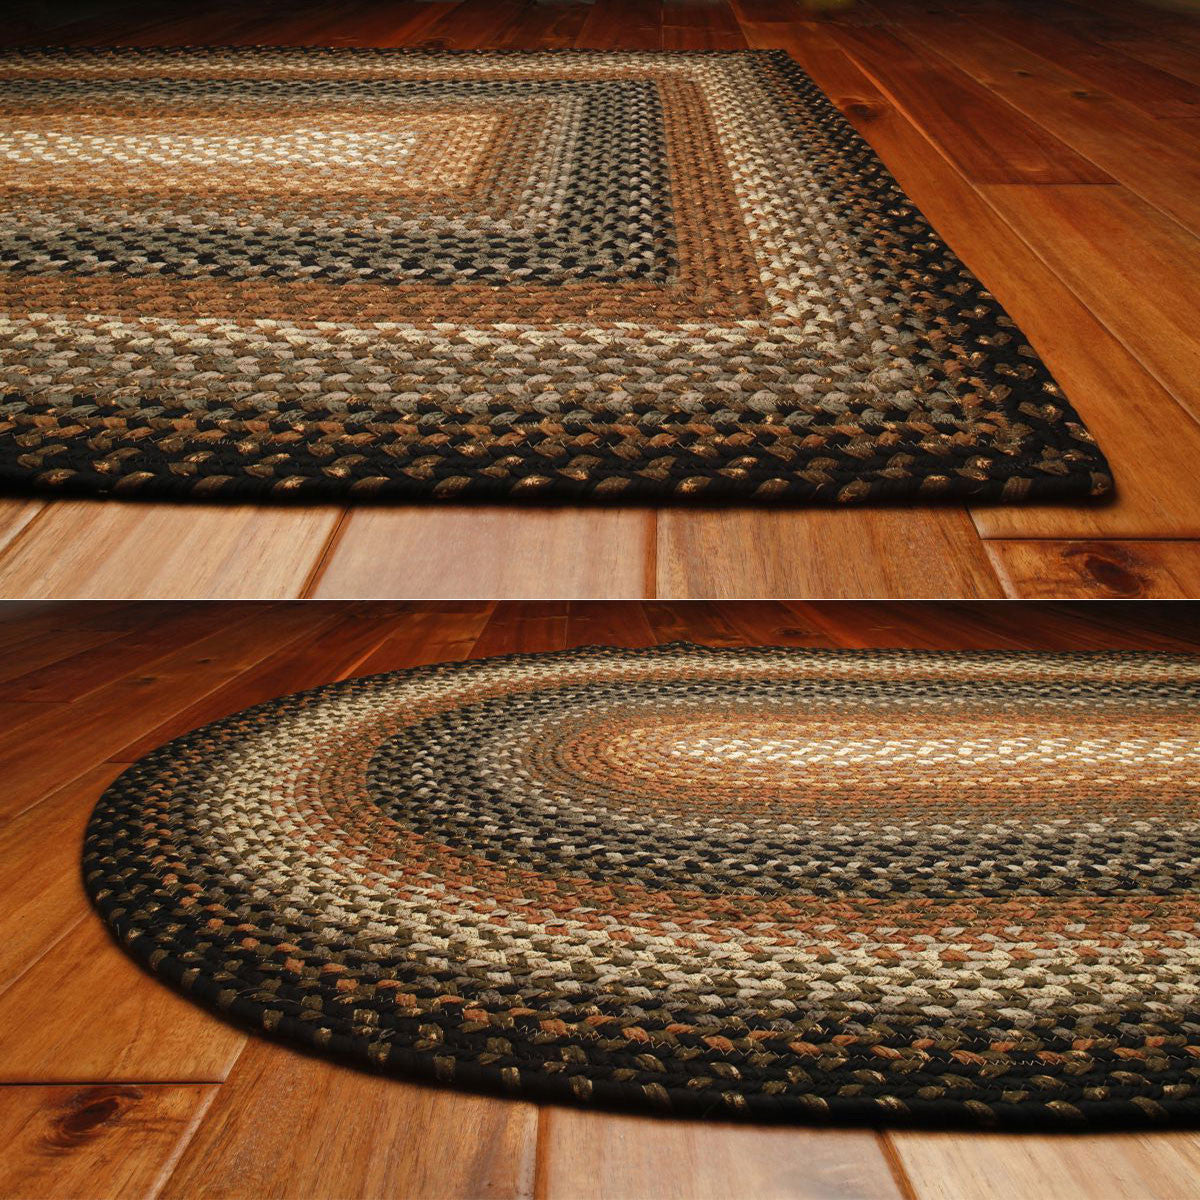 Cocoa Bean Cotton Braided Rug  Country Primitive Braided Rug by